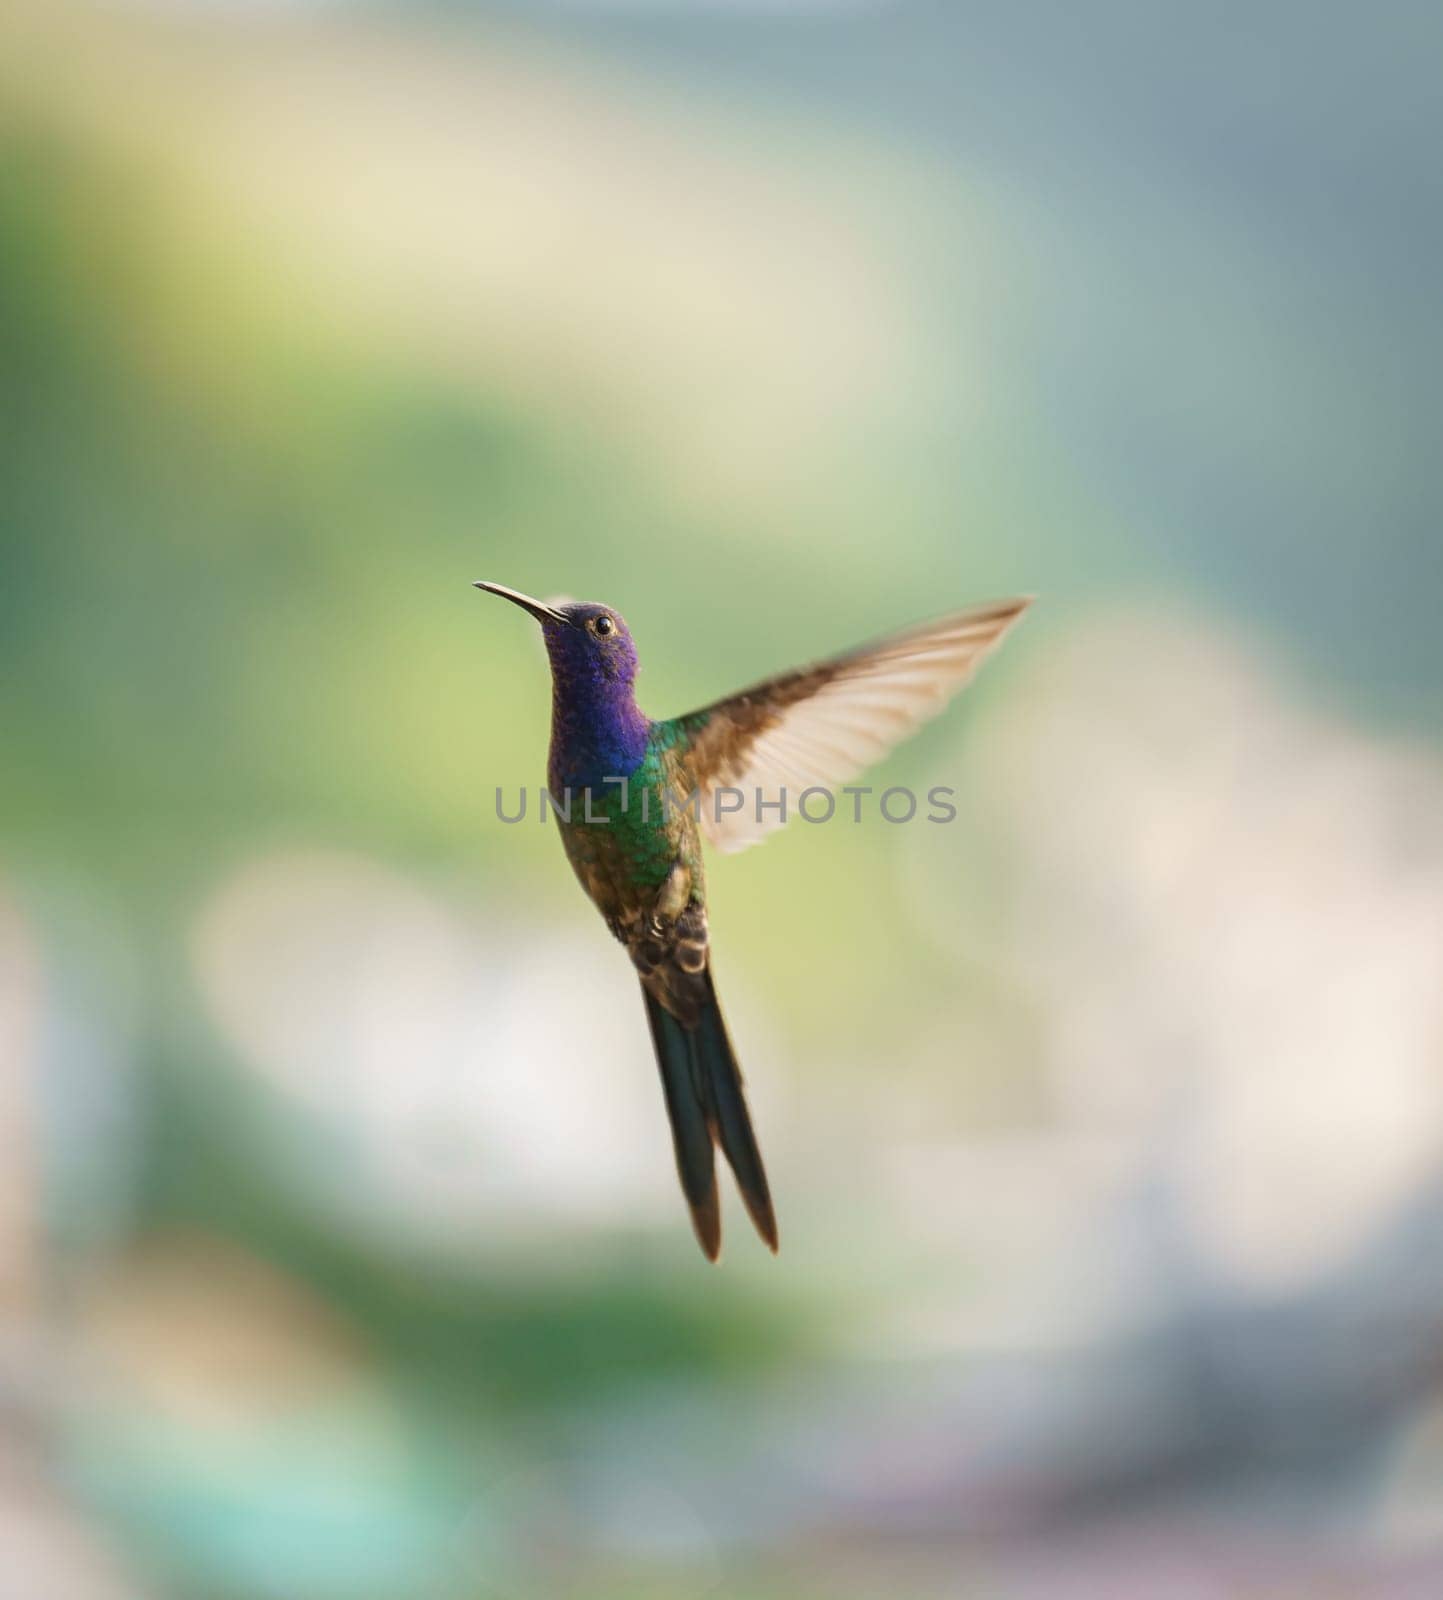 Beautiful Hummingbird with Multicolored Feathers in Flight by FerradalFCG